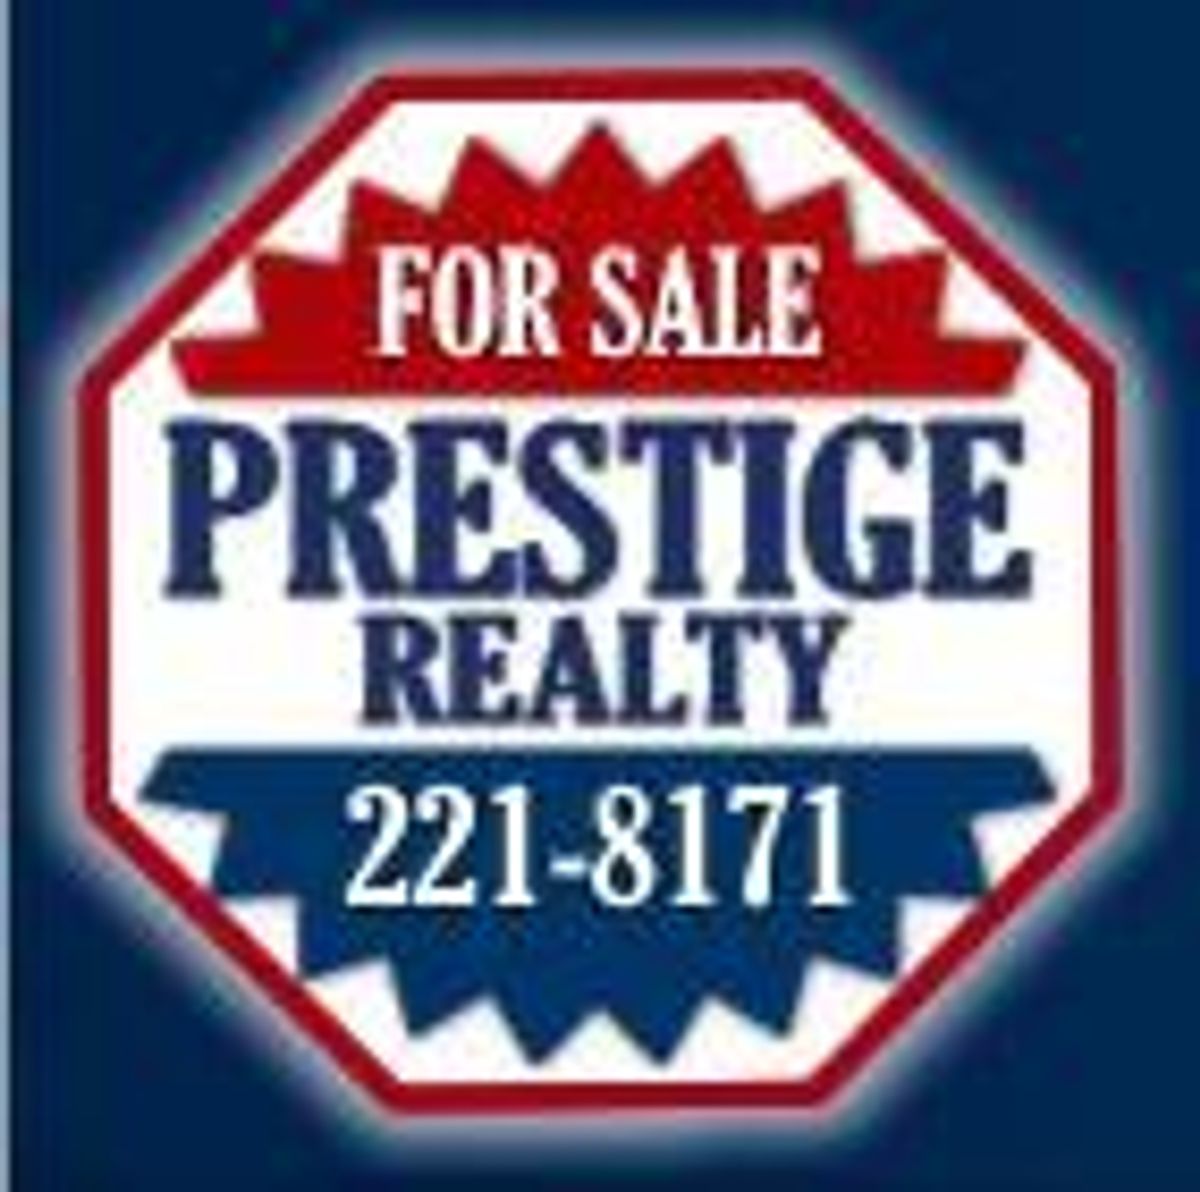 Photo for Kristy Trevathan, Listing Agent at Prestige Realty, Inc